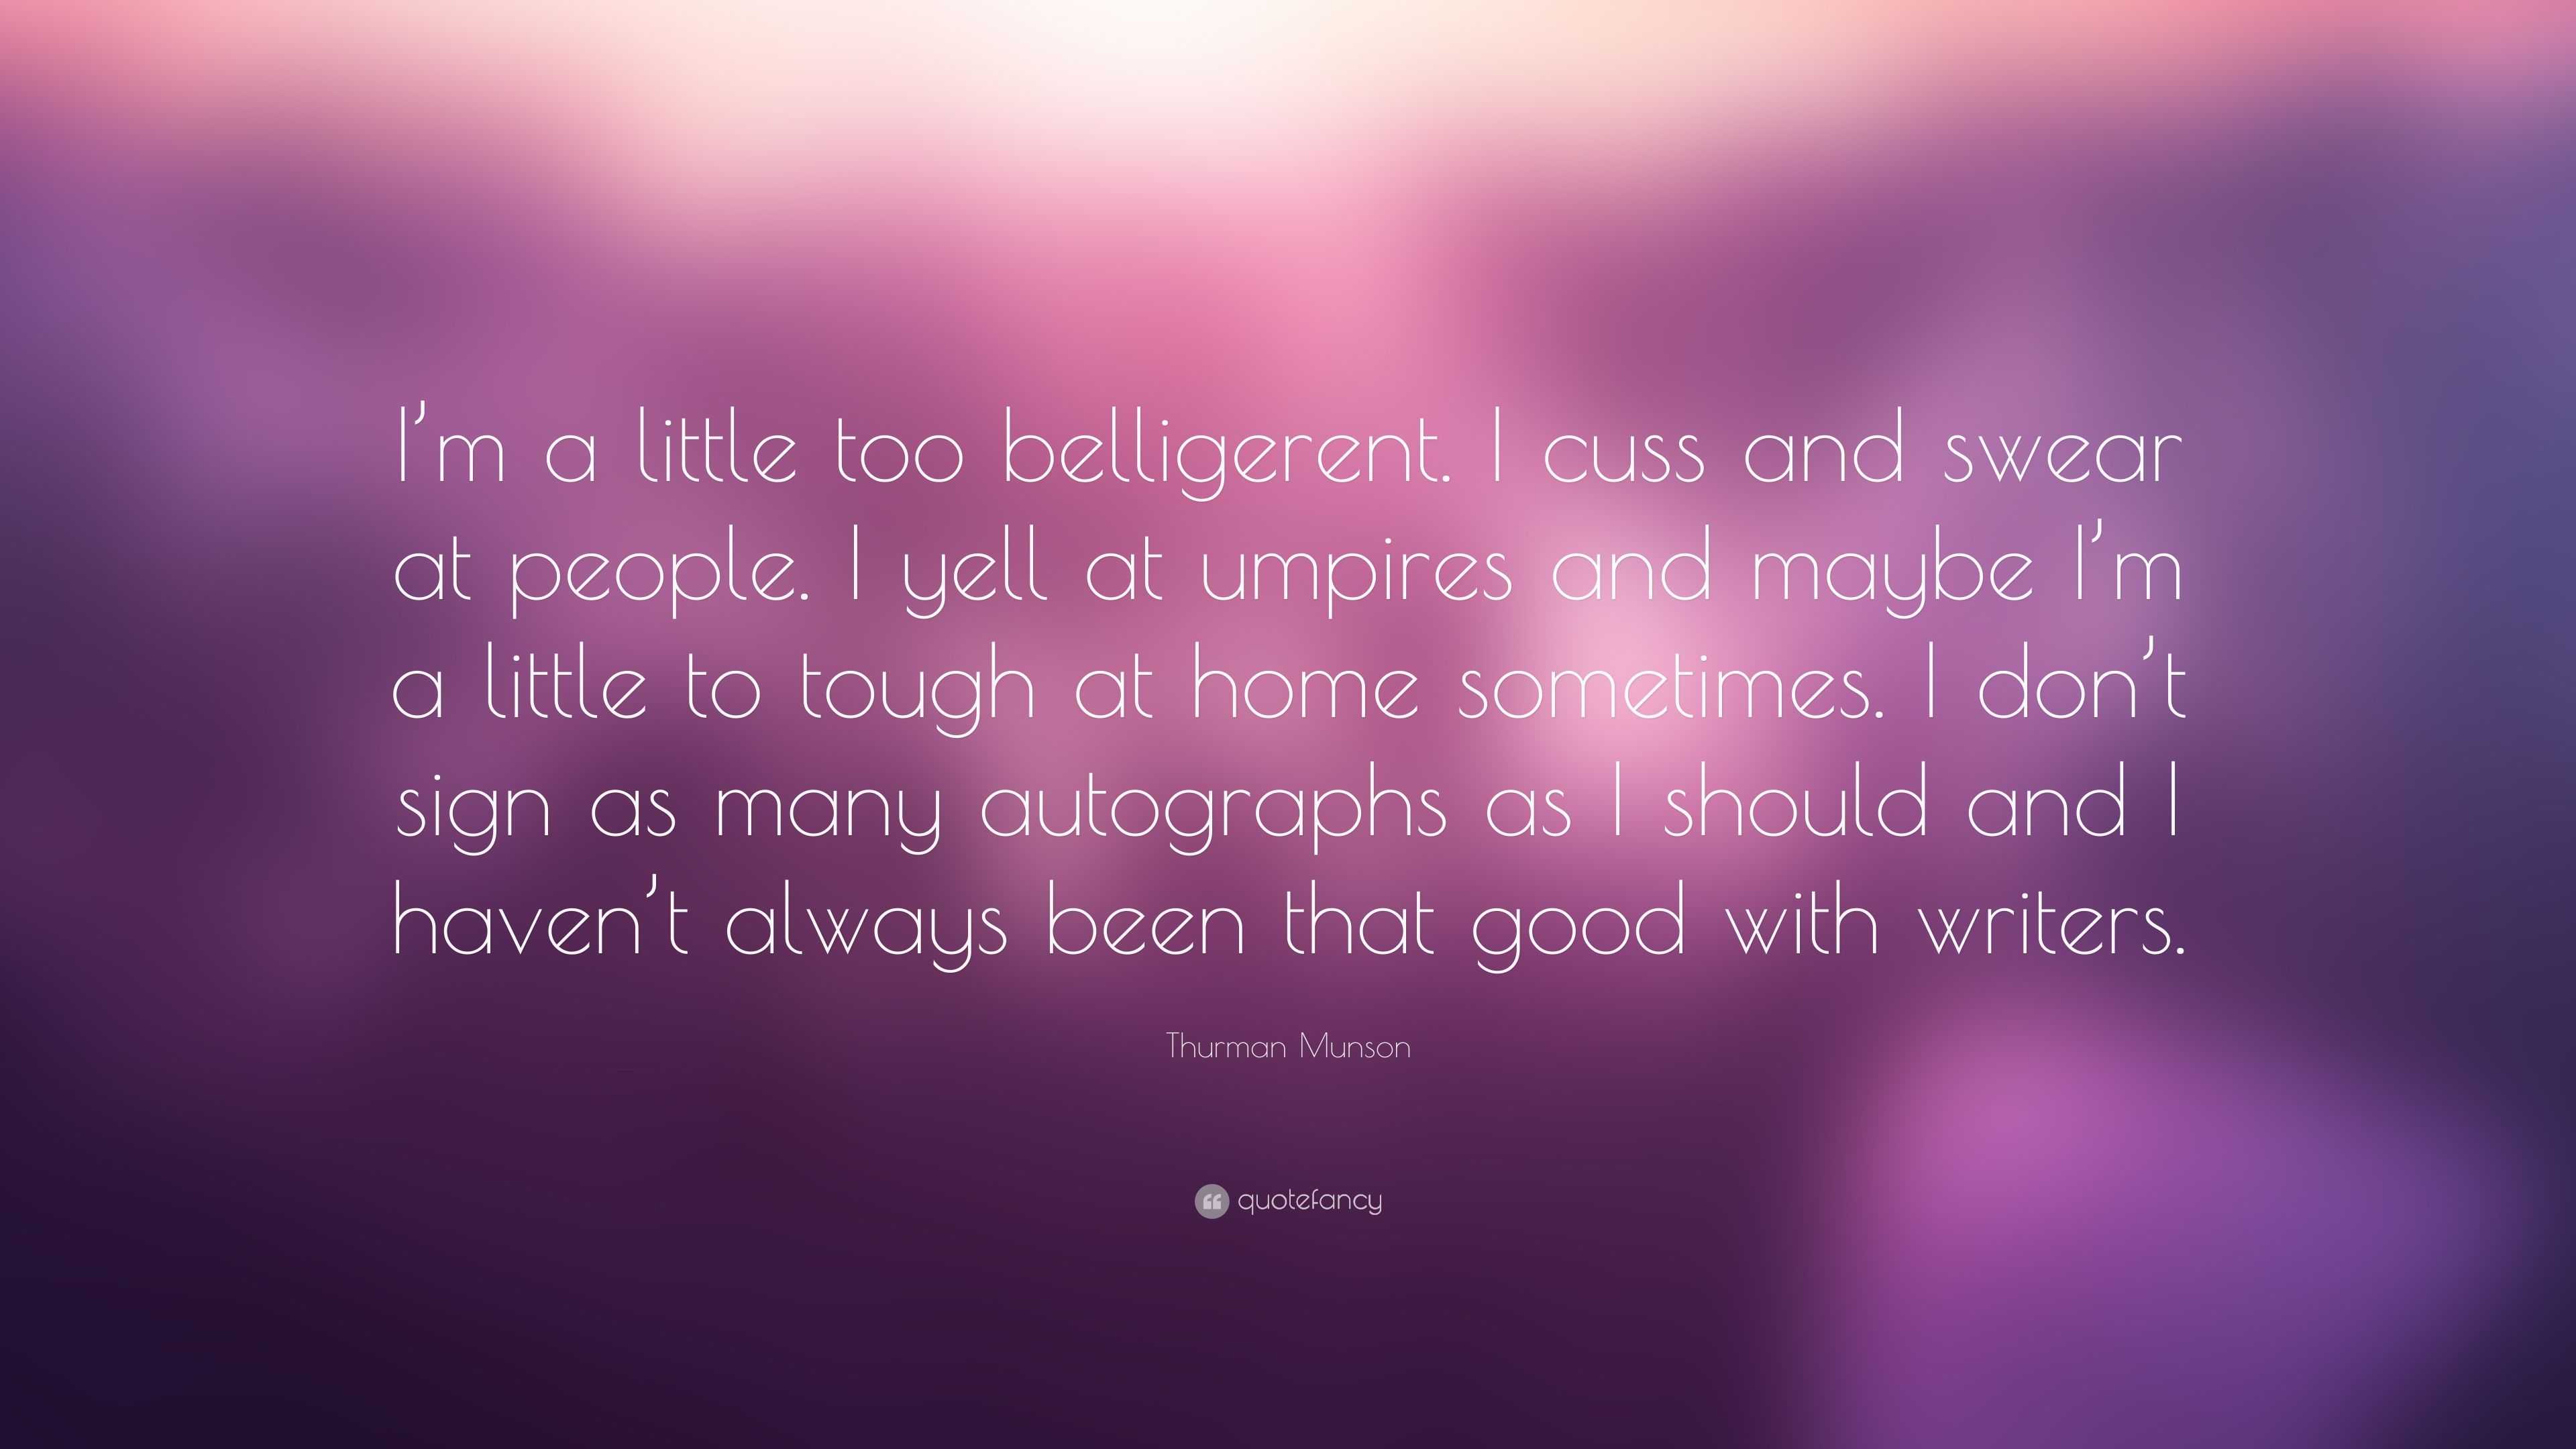 Thurman Munson Quote: “I'm a little too belligerent. I cuss and